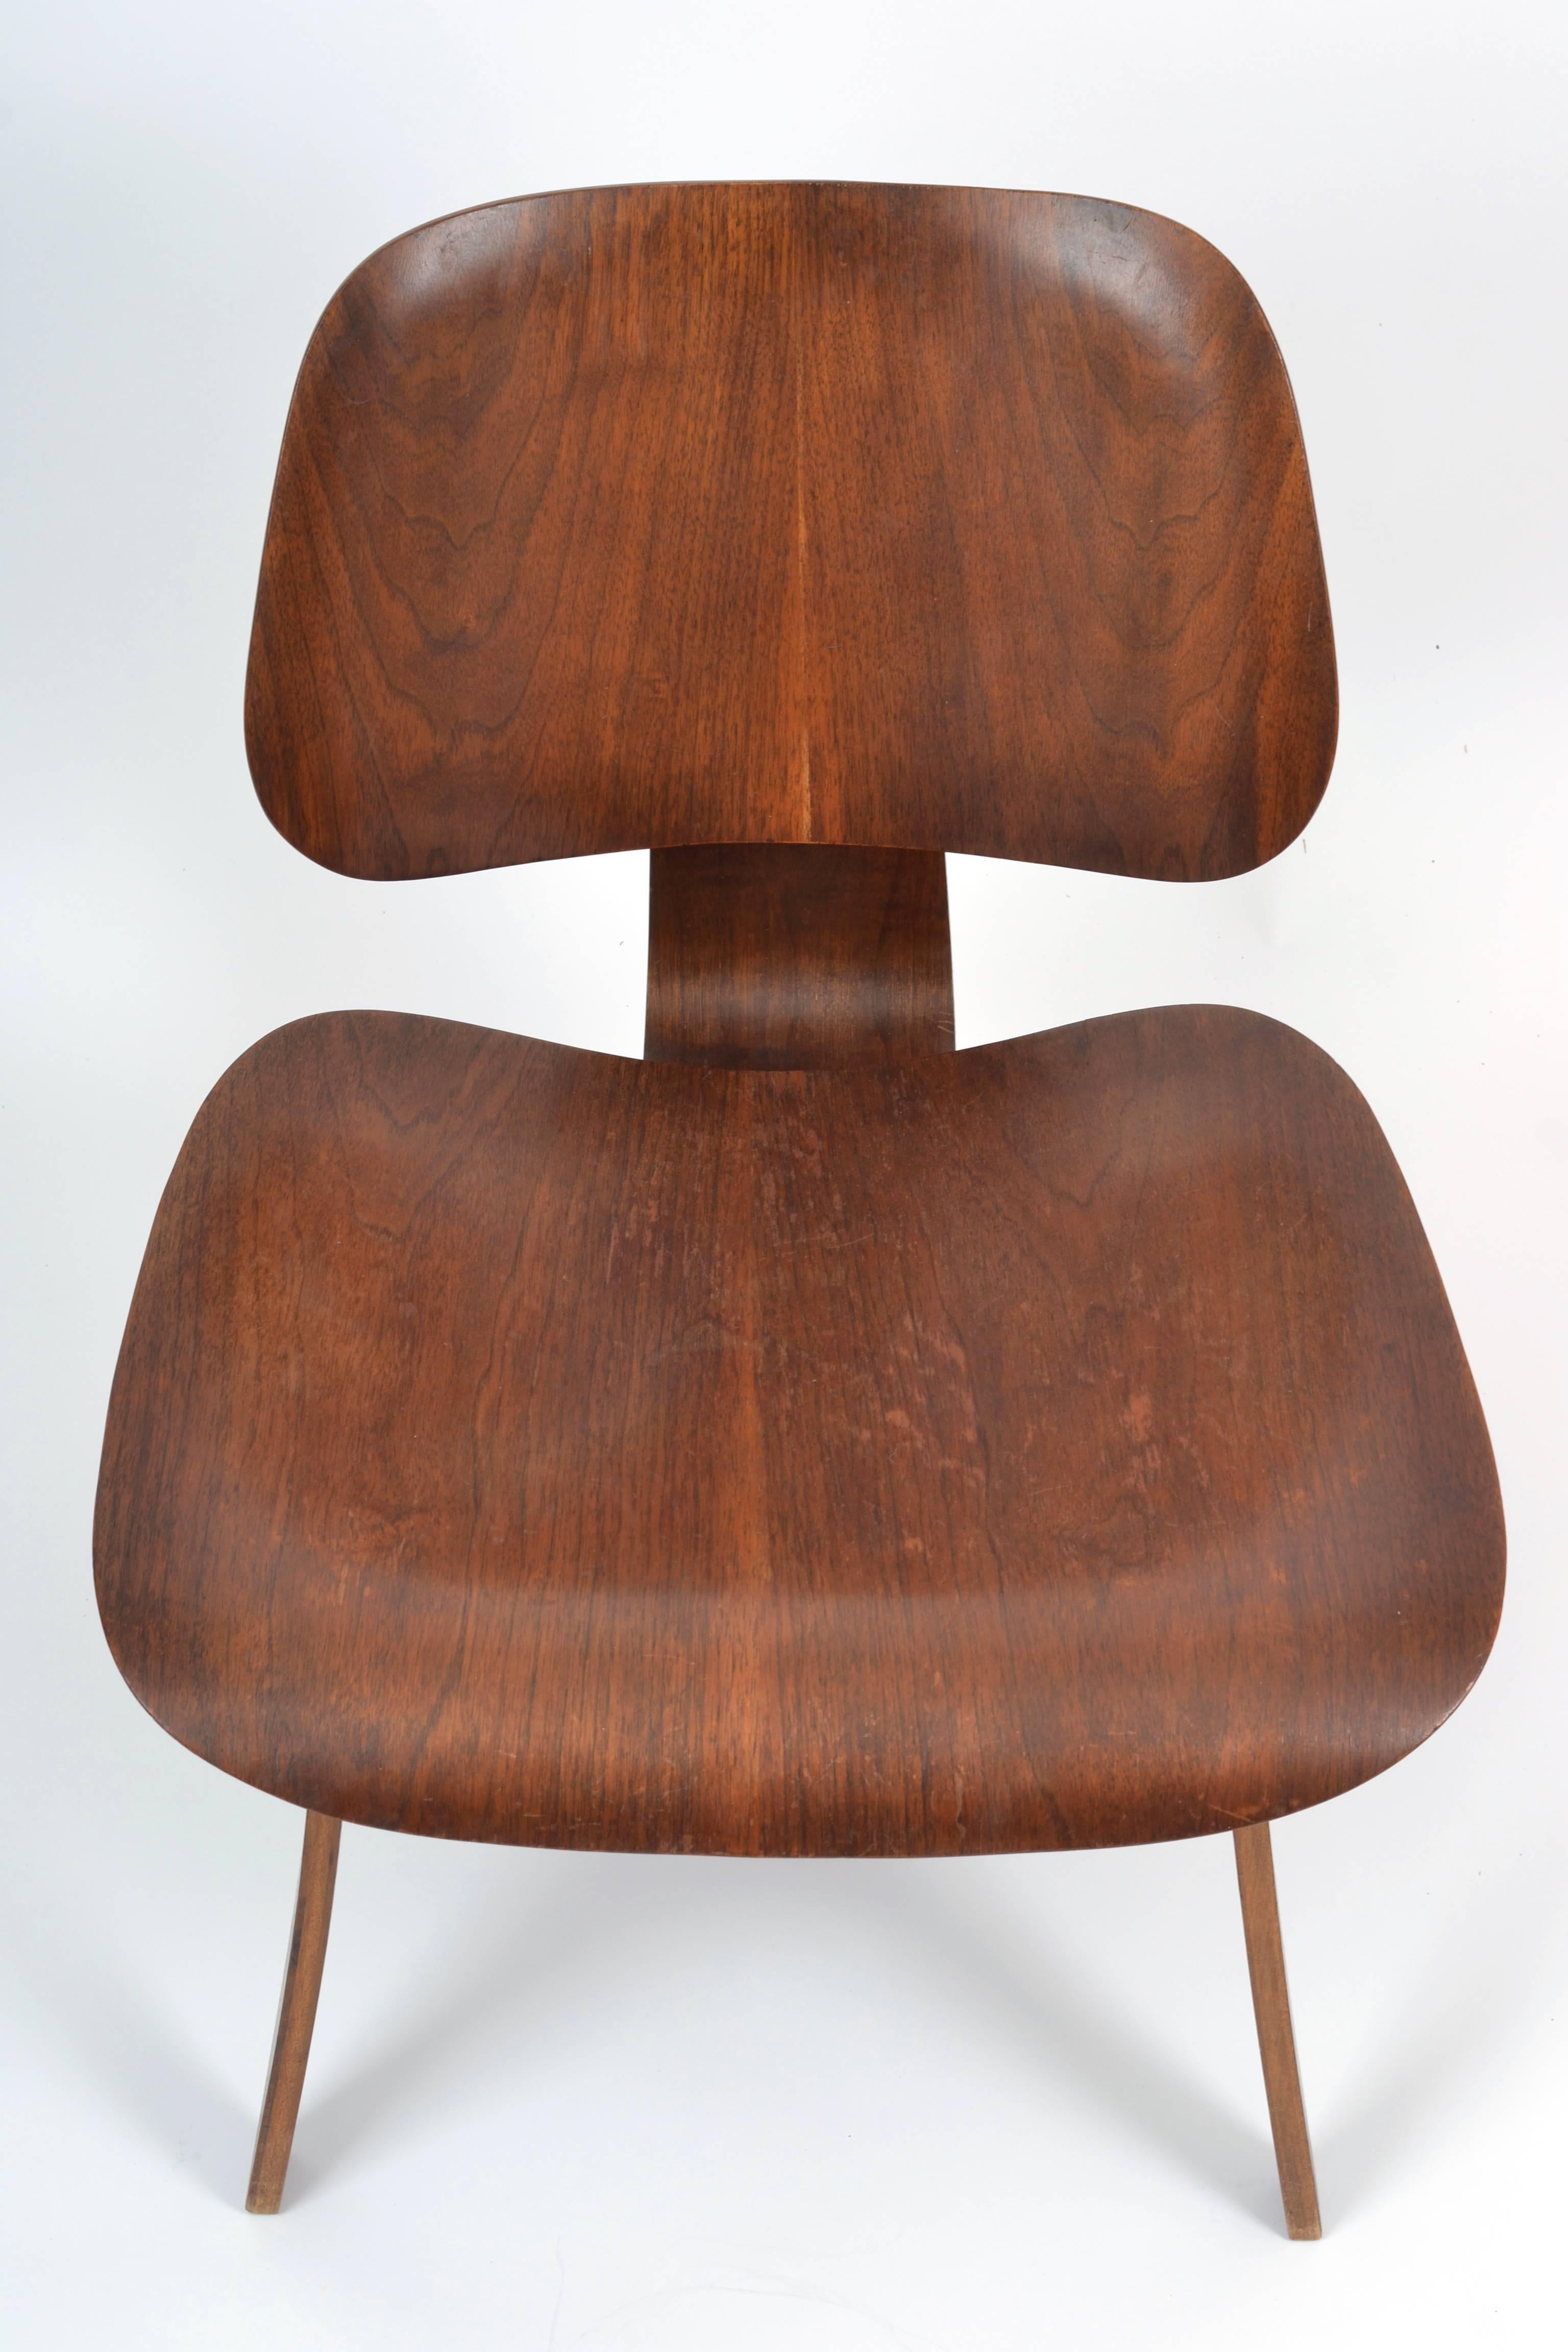 A rare dark walnut example in incredible condition with no chips and minimal wear for it's age. The Herman Miller/Evans Products Company label is intact.